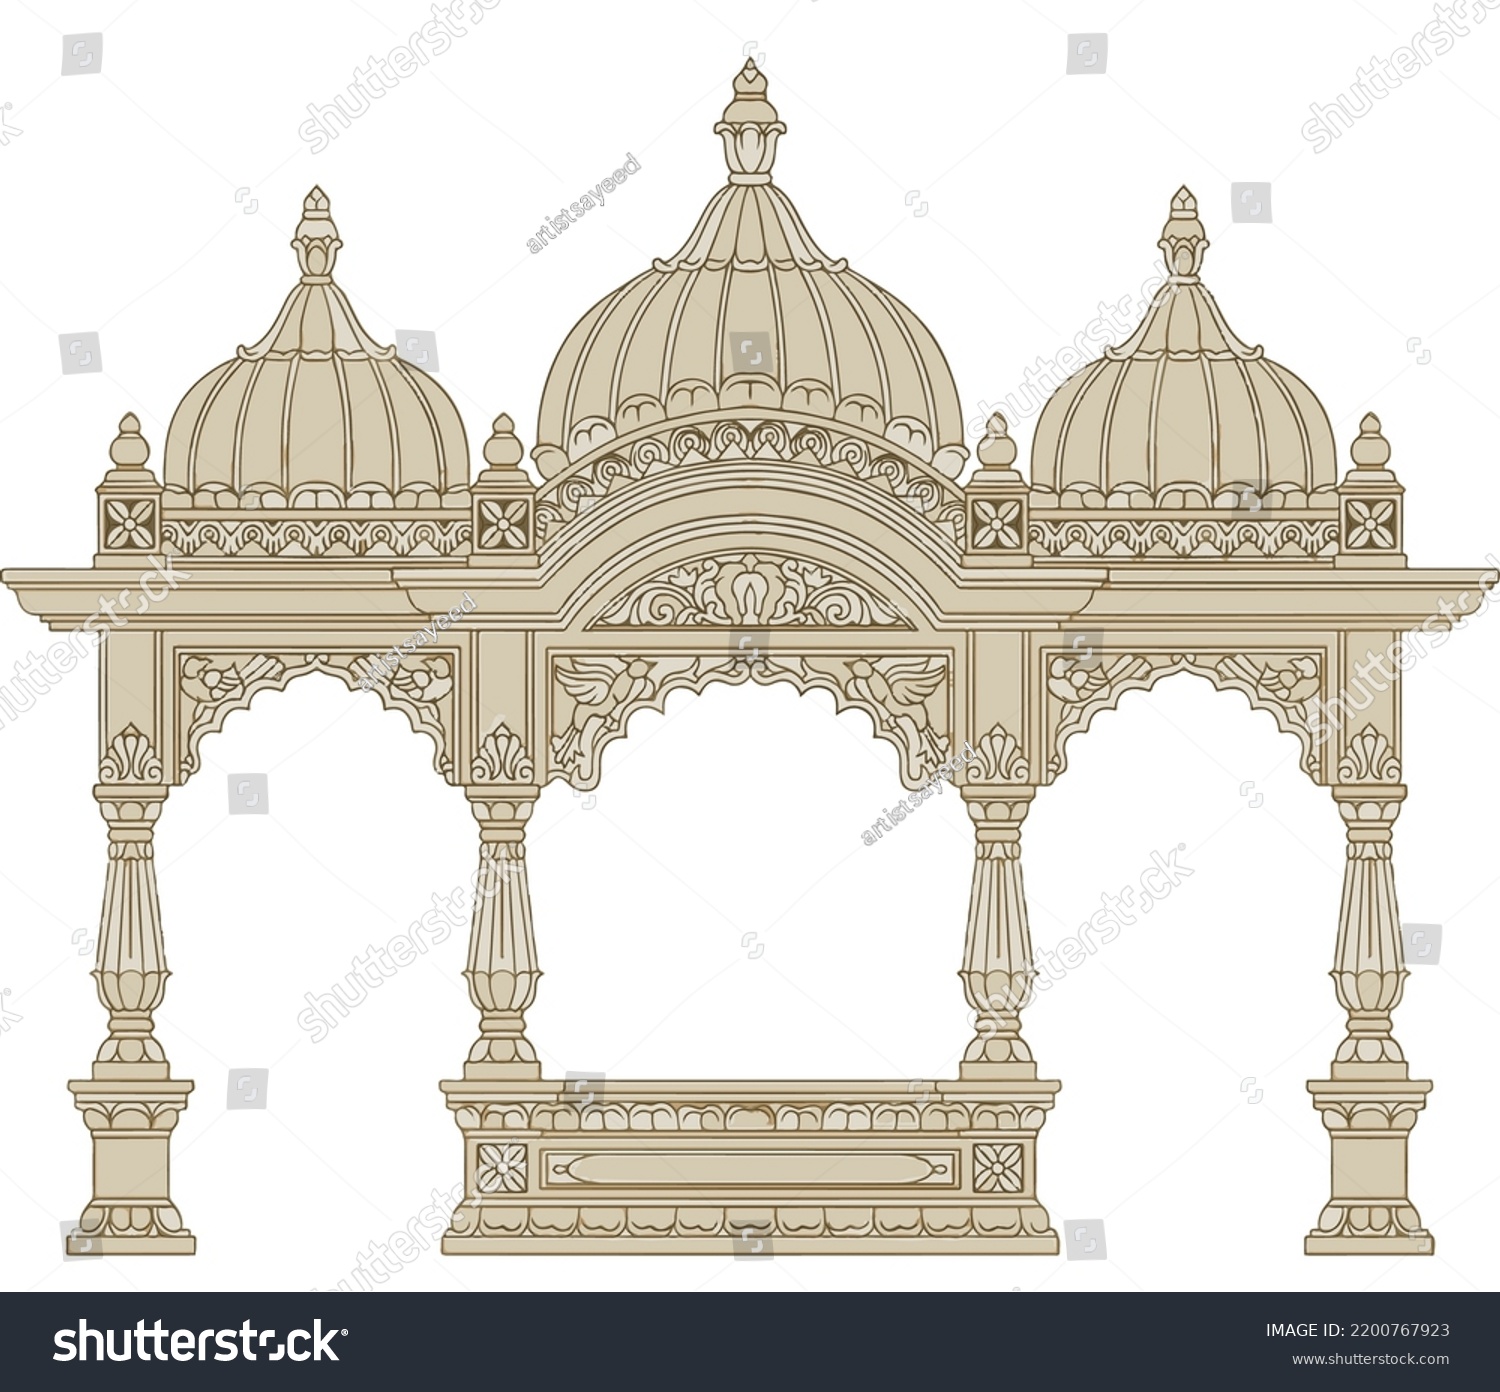 Traditional Indian Mughal arch temple vector illustration #2200767923